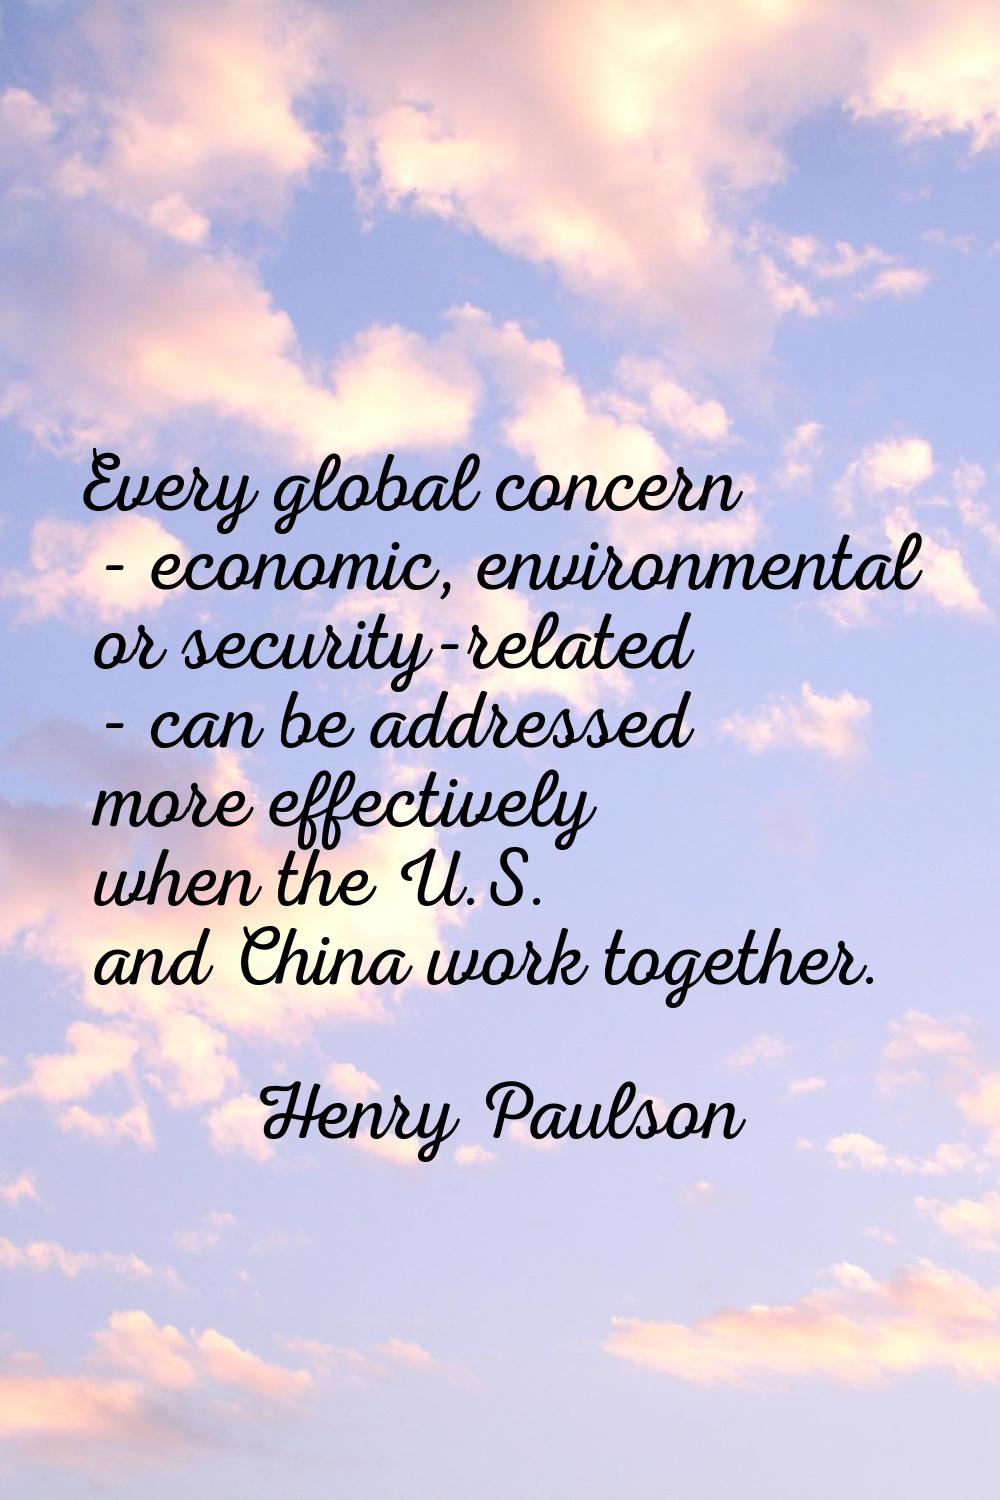 Every global concern - economic, environmental or security-related - can be addressed more effectiv